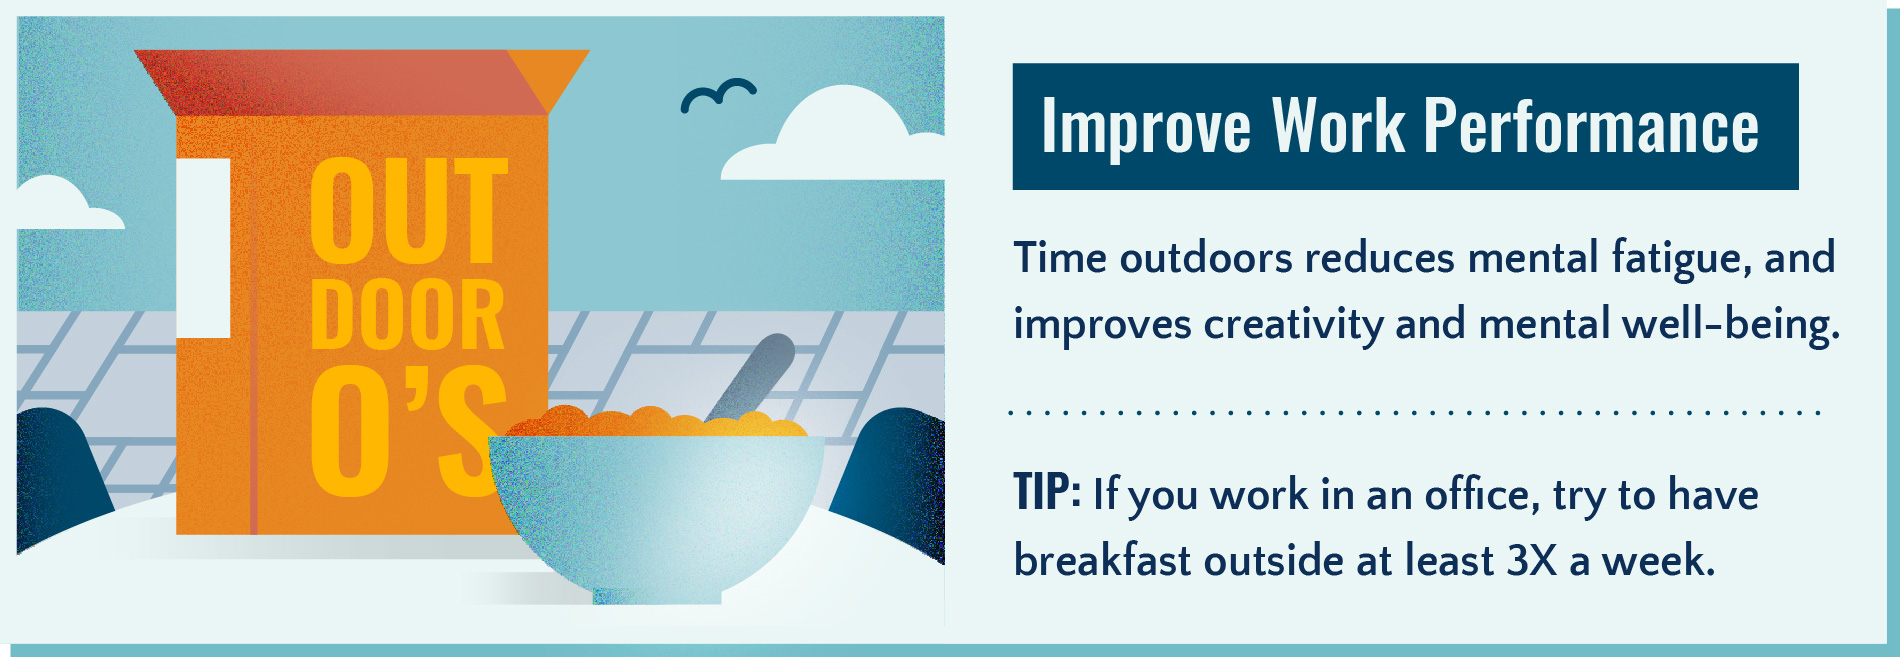 Improve Work Performance by spending time outside